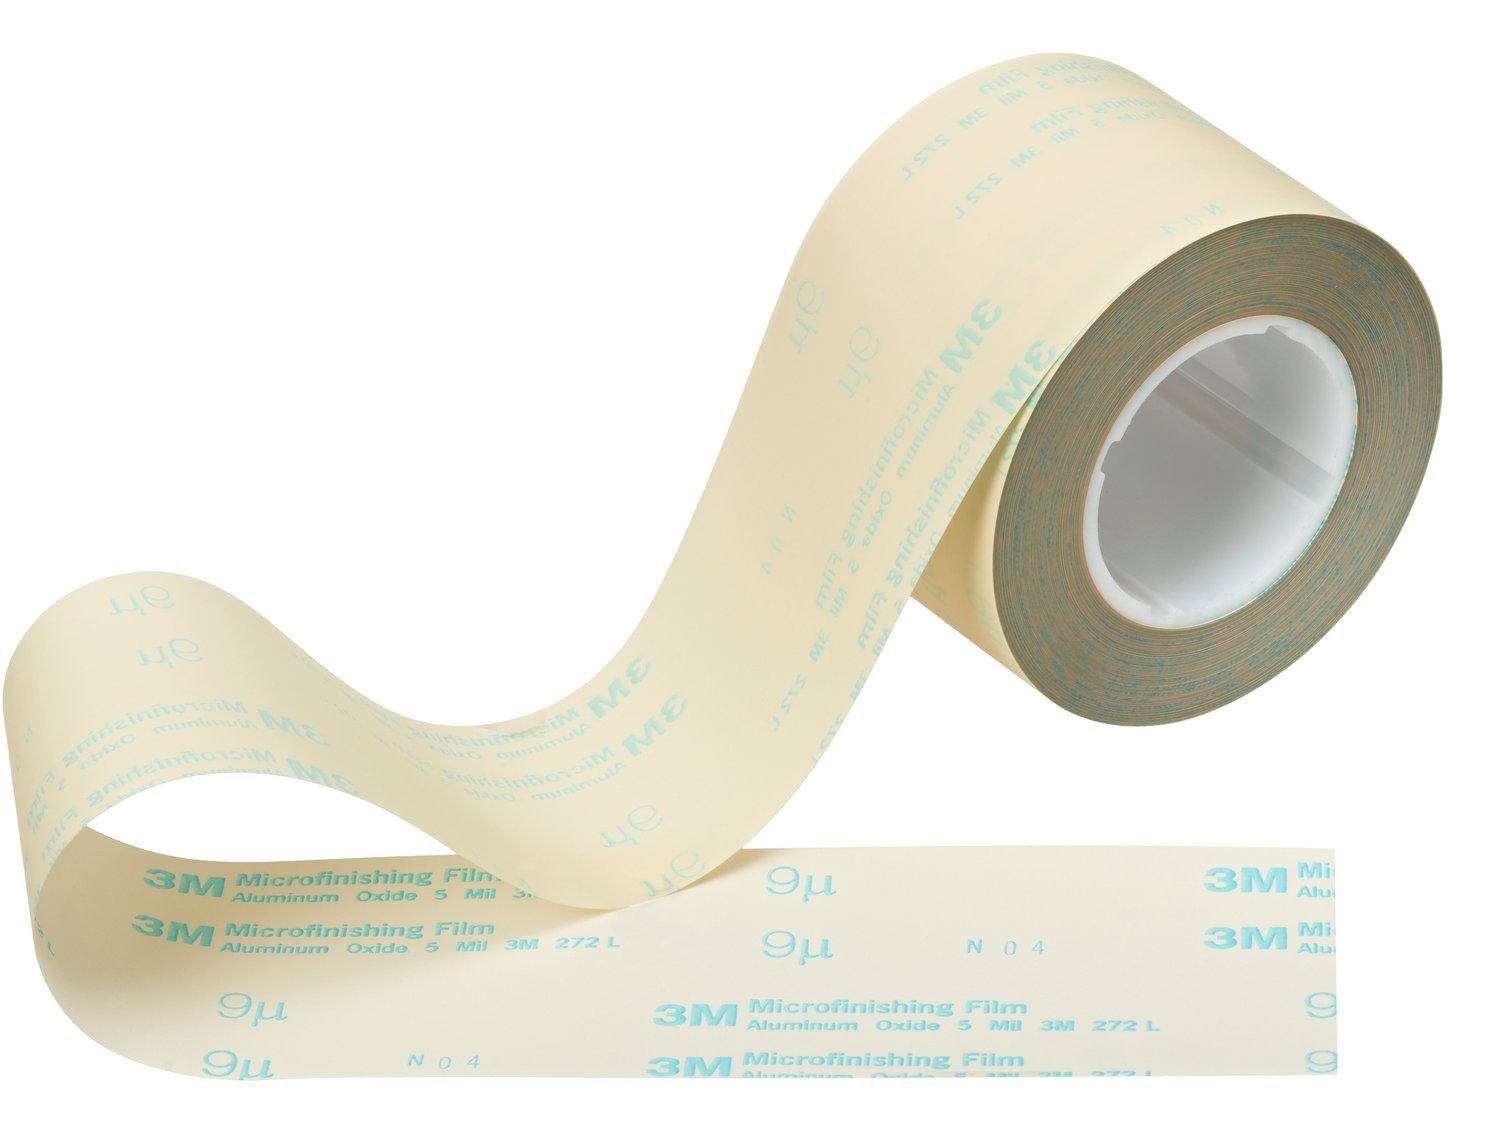 7010533912 - 3M Microfinishing Film Roll 272L, 15 Mic 5MIL, Type UK, 2 in x 150 ft x
3 in (50.8mmx45.75m), Keyed Core, ASO